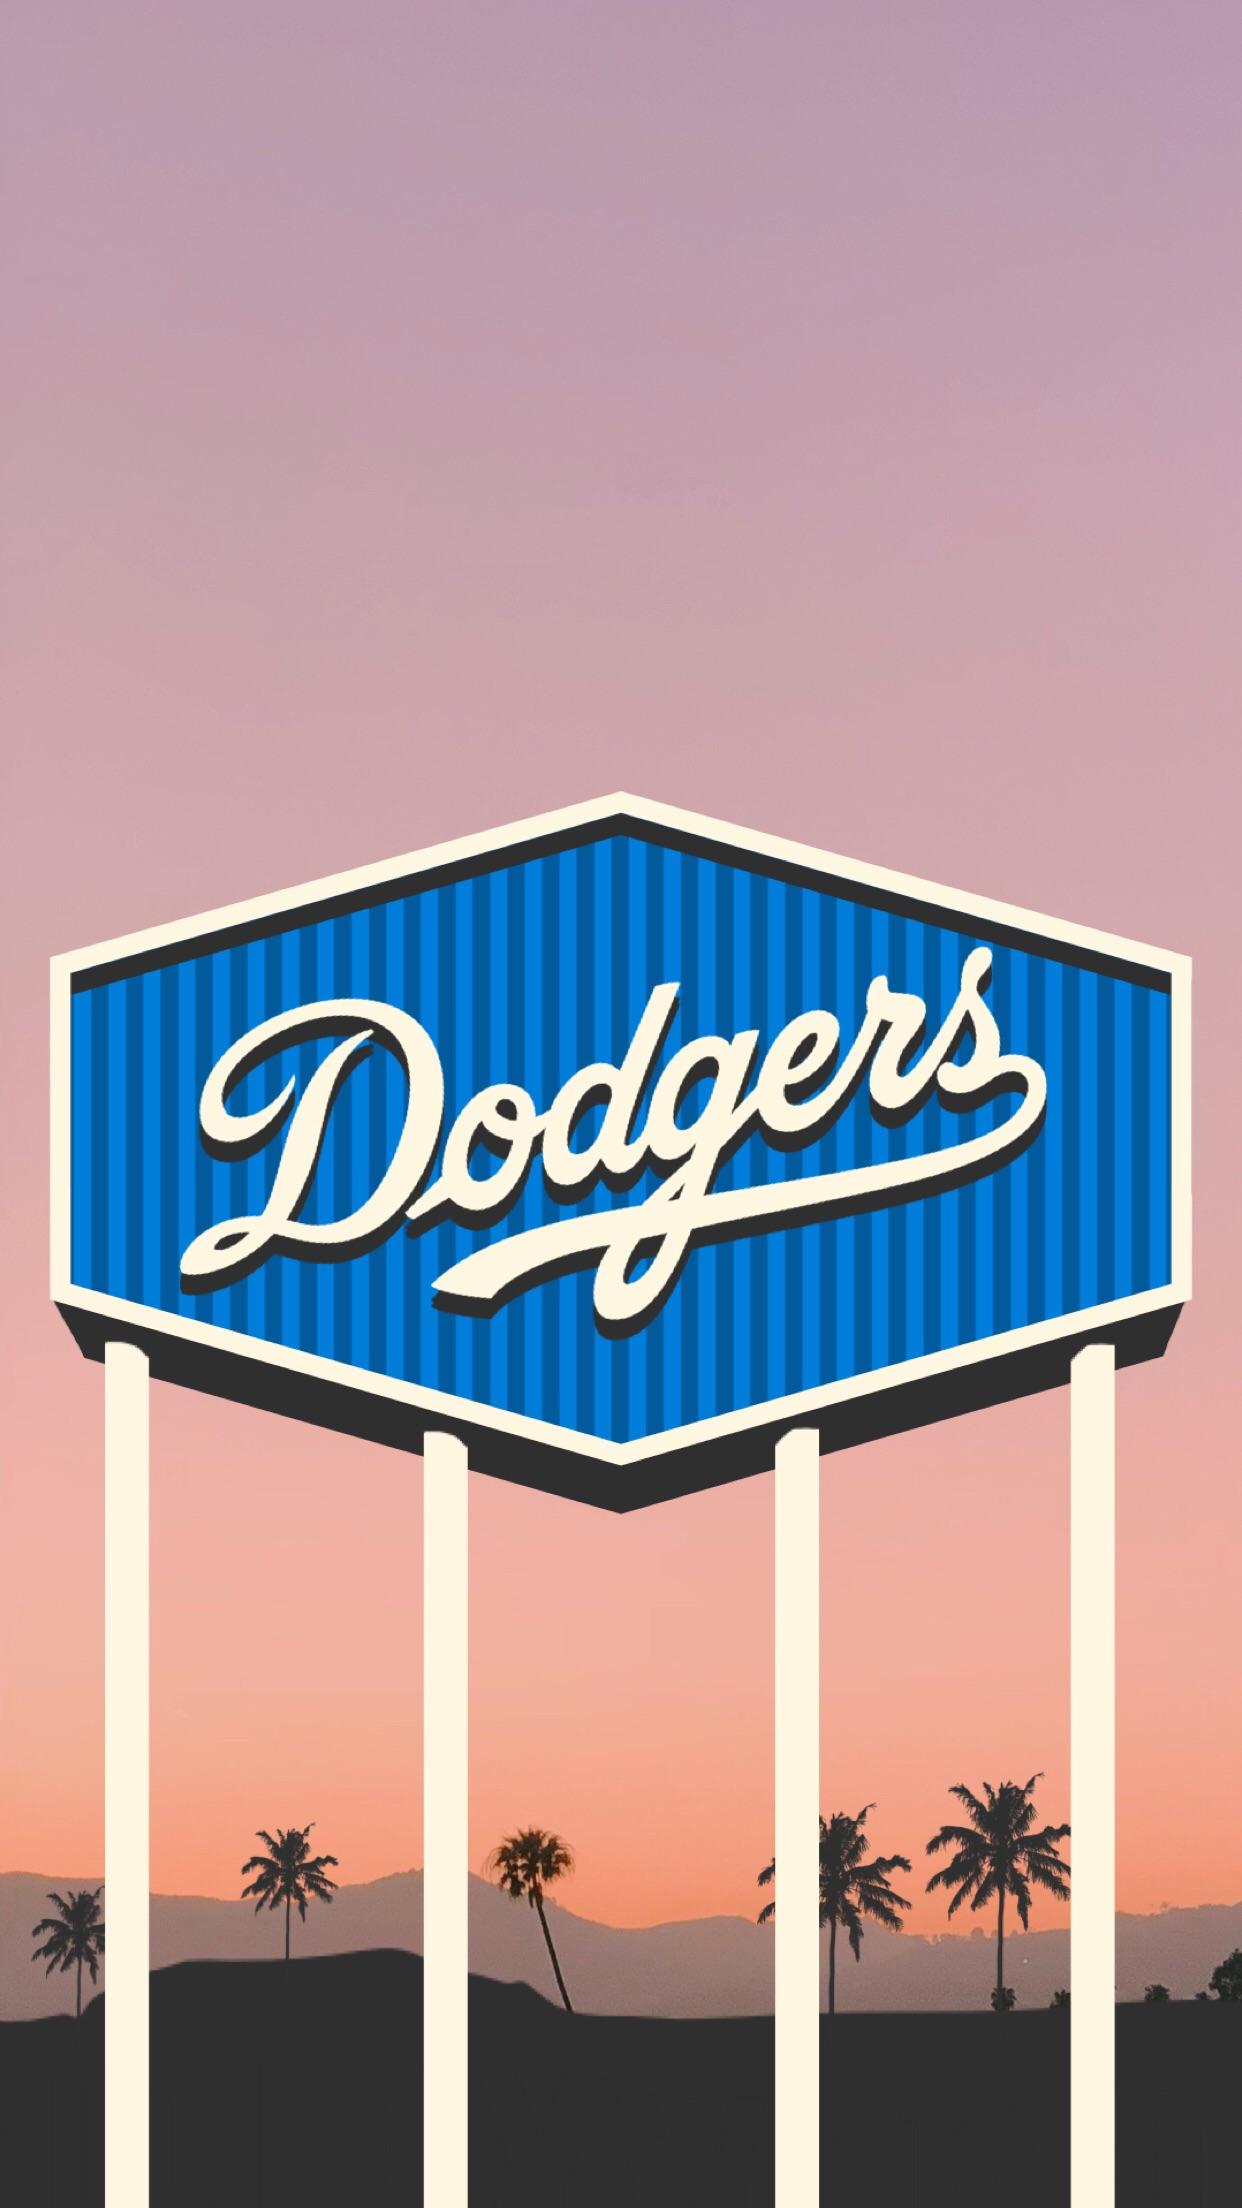 Dodgers iPhone Wallpapers  Top Free Dodgers iPhone Backgrounds   WallpaperAccess